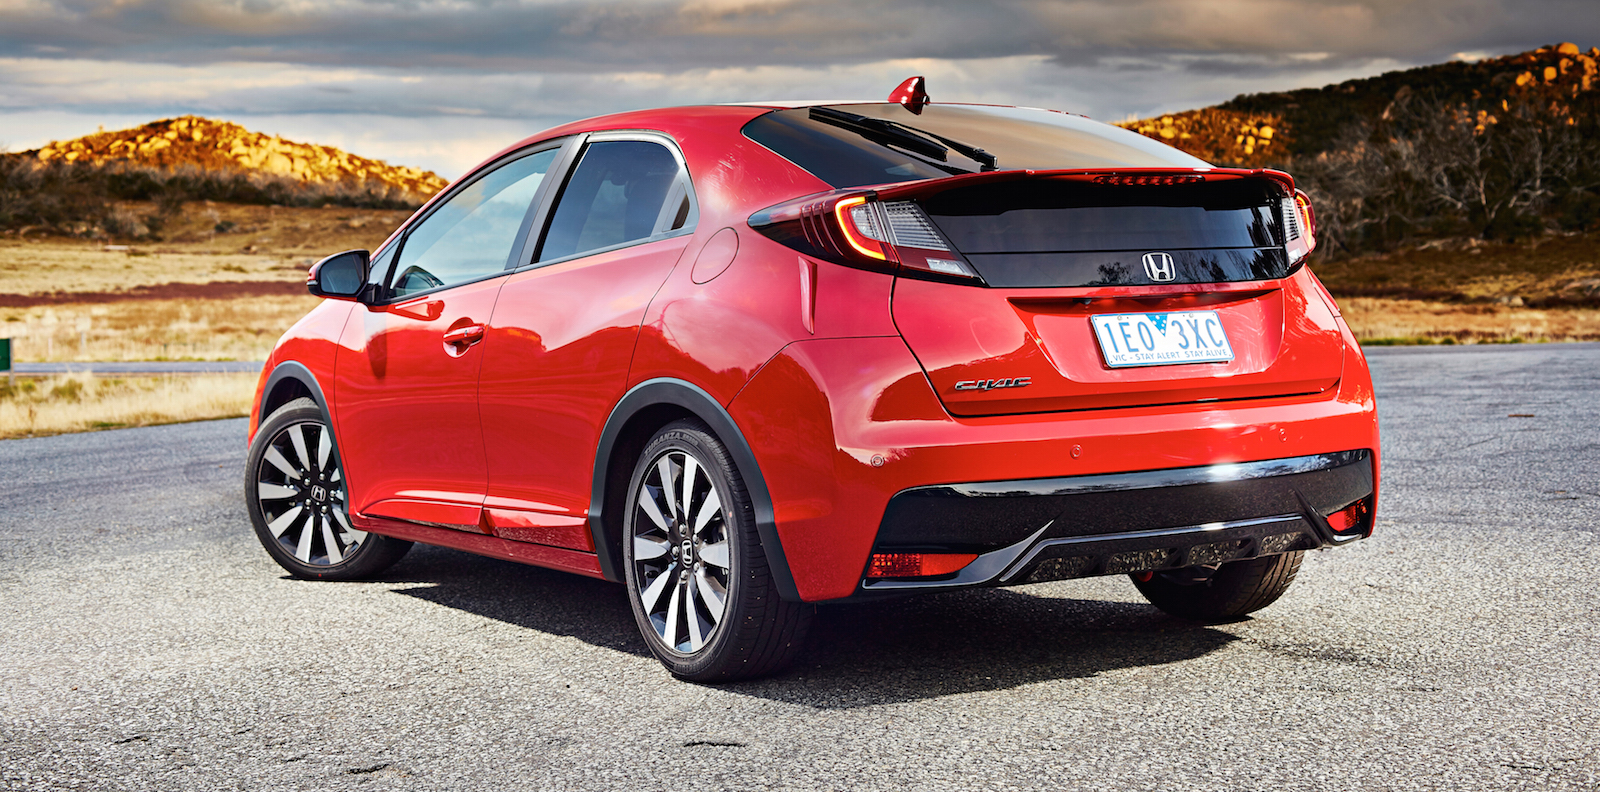 2015 Honda Civic hatch pricing and specifications - Photos (1 of 5)